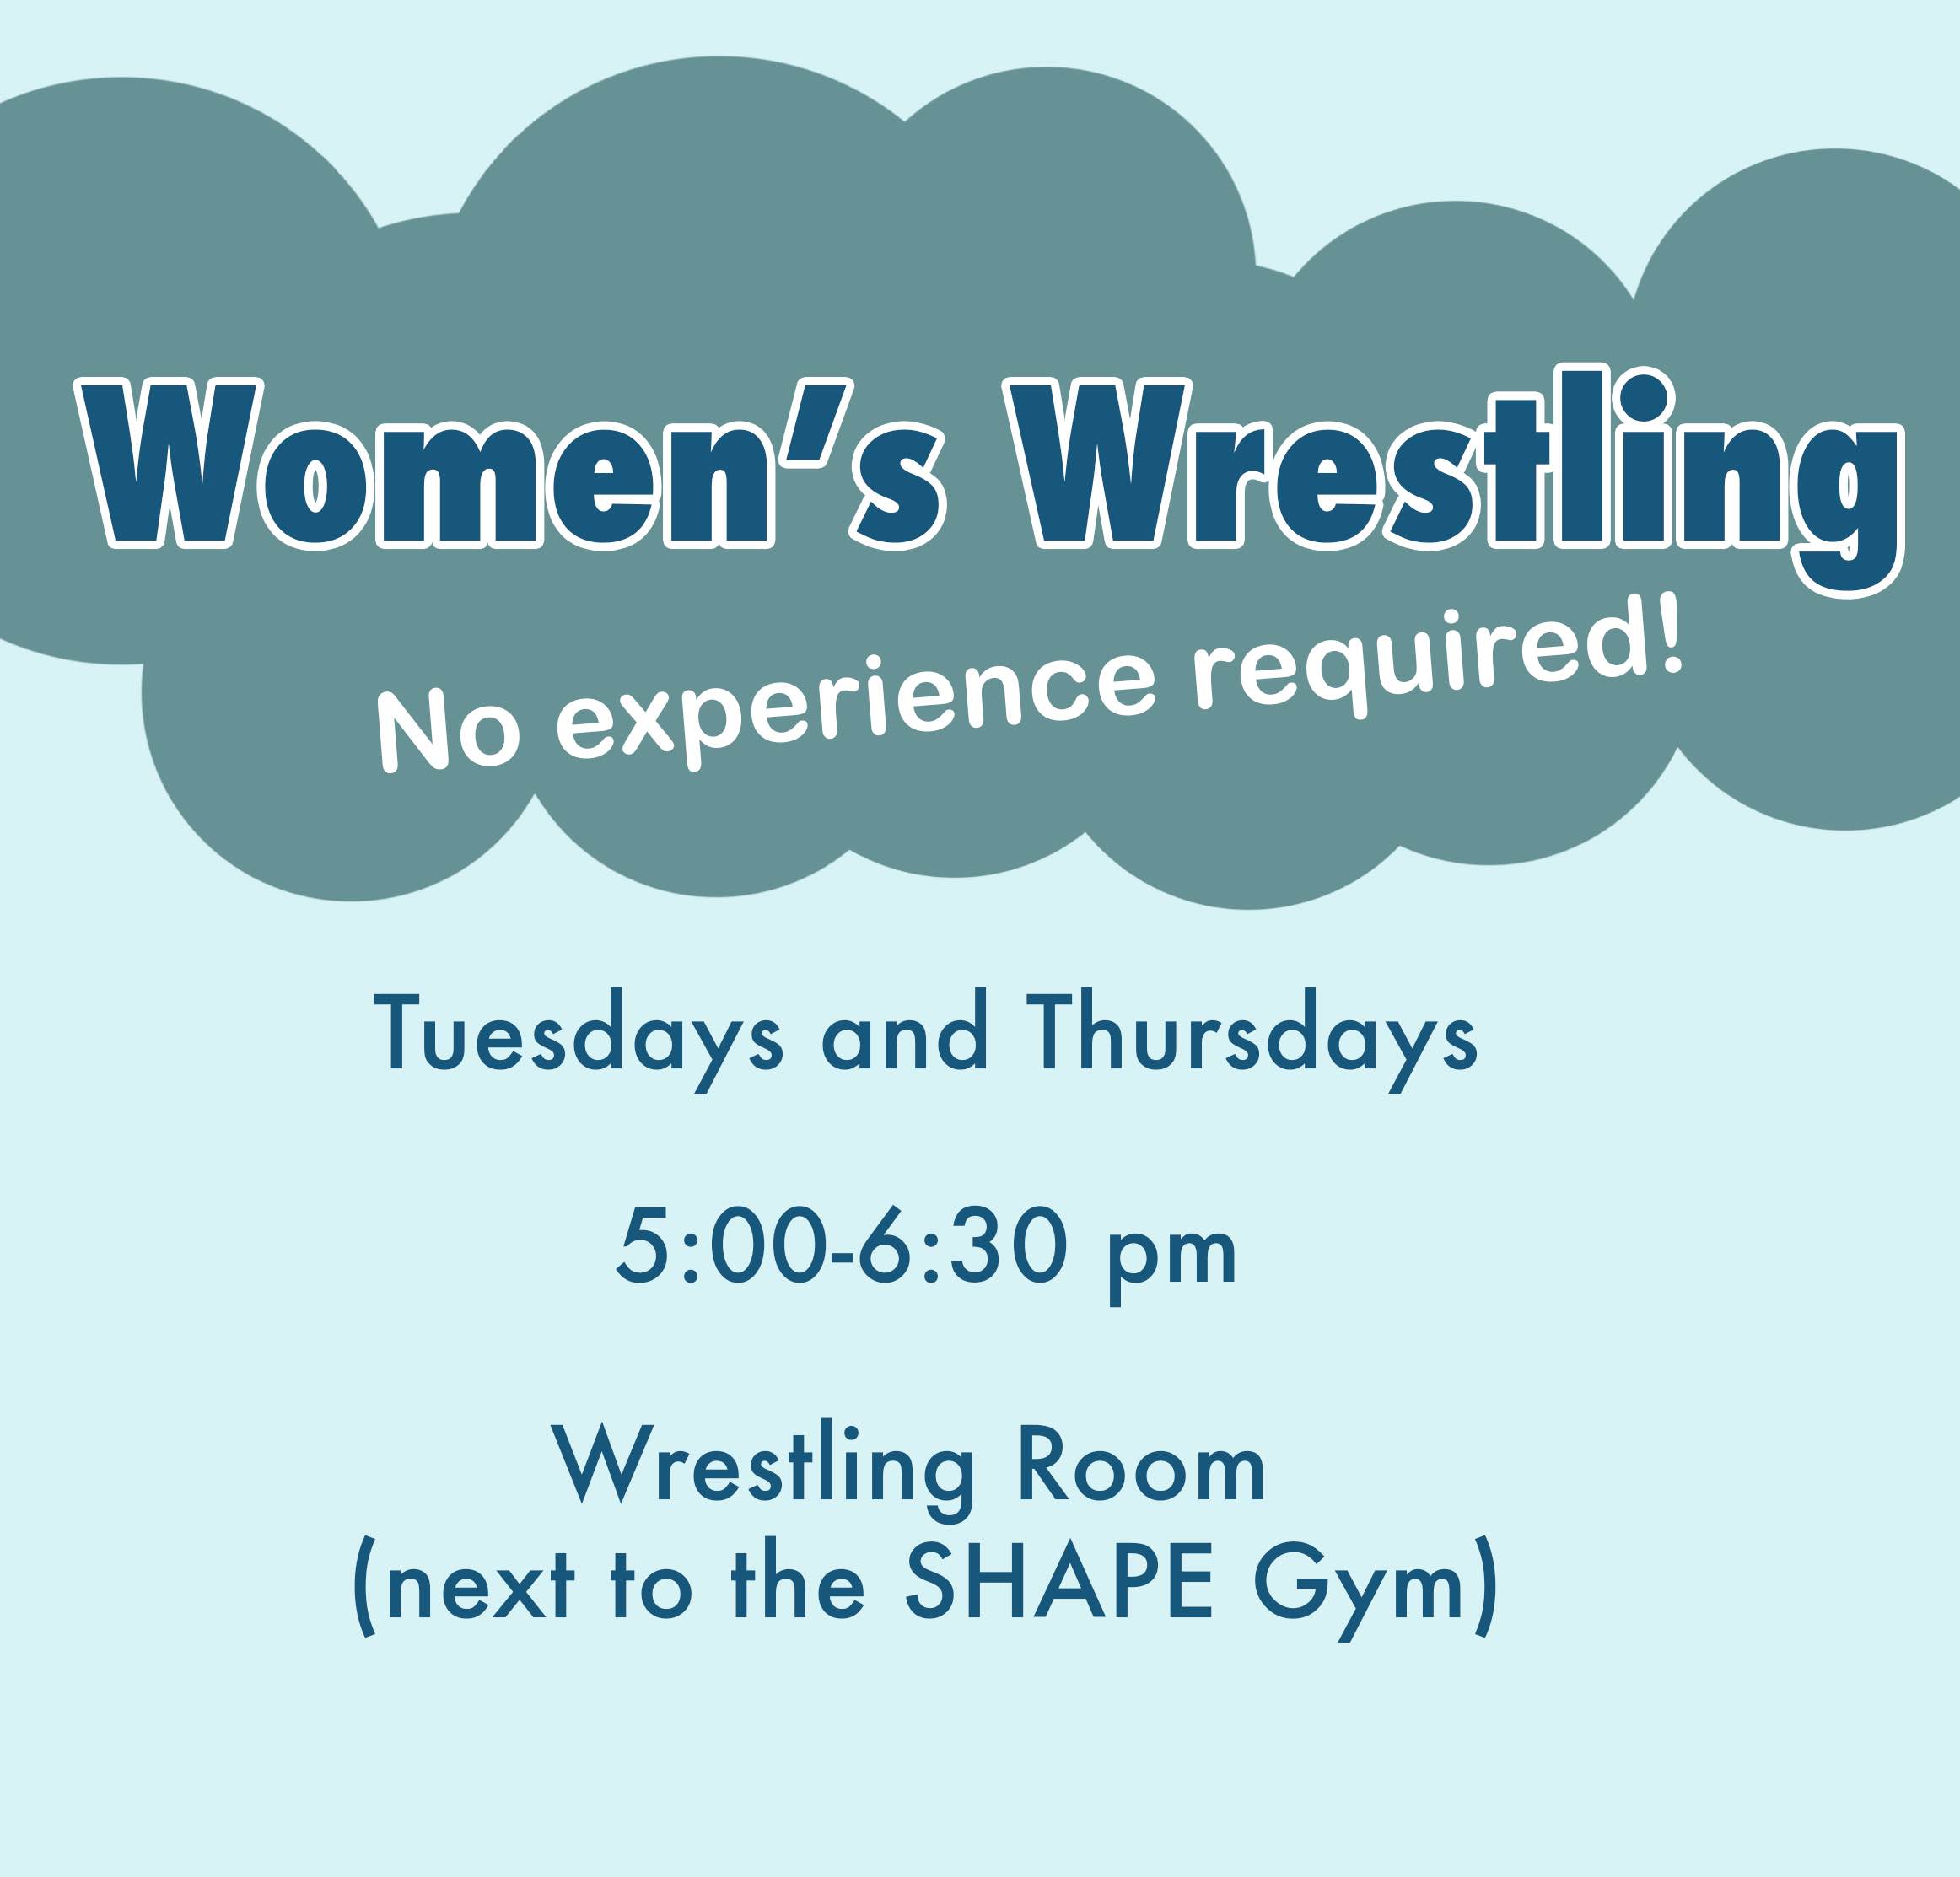 Samantha Hallock, the president of the Women's Wrestling Club, is excited to announce the beginning of weekly practices! 

From now on (besides finals week) they will be having practices every Tuesday and Thursday from 5:00-6:30 in the Wrestling Room (located next to the Shape Gym). 

No experience or wrestling equipment is needed! If you have any questions feel free to email Samantha!